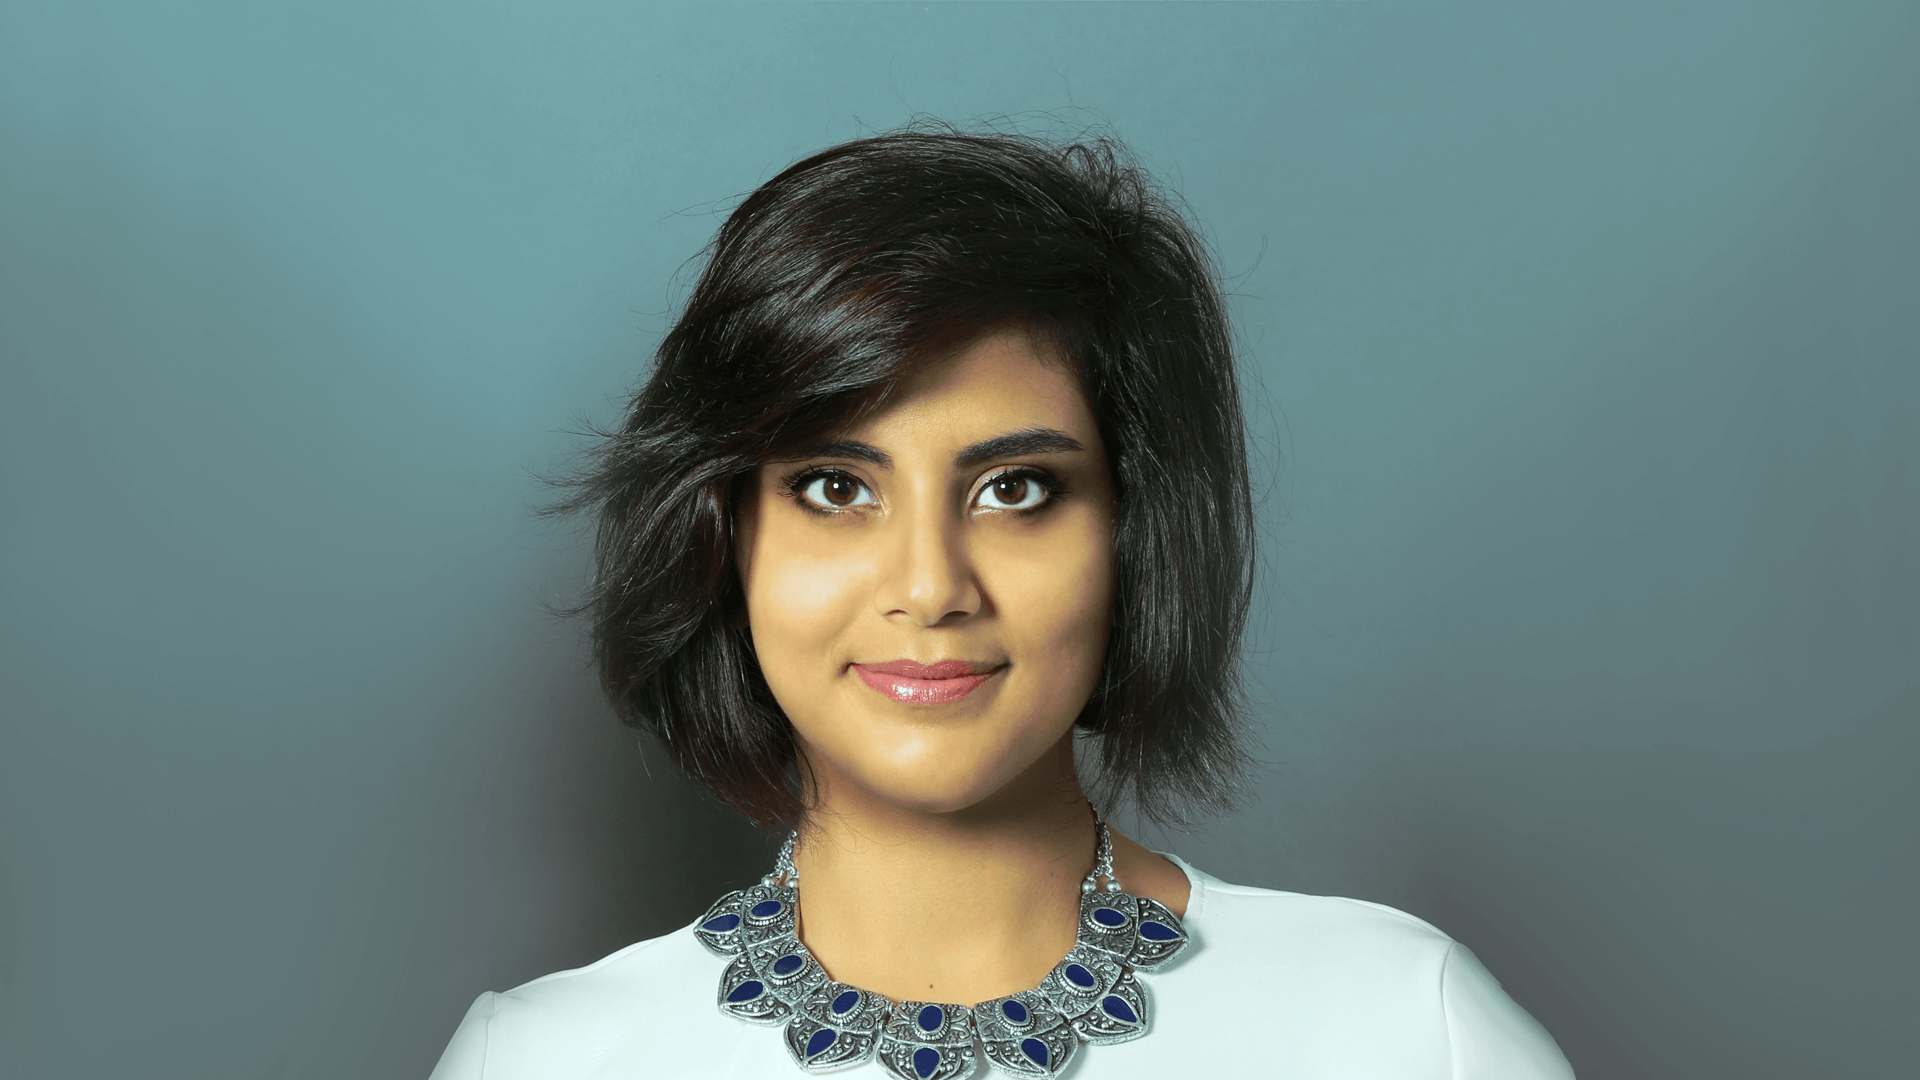 HRF Joins Coalition Calling on President Biden to Help Facilitate Lifting the Travel Ban on Loujain al-Hathloul